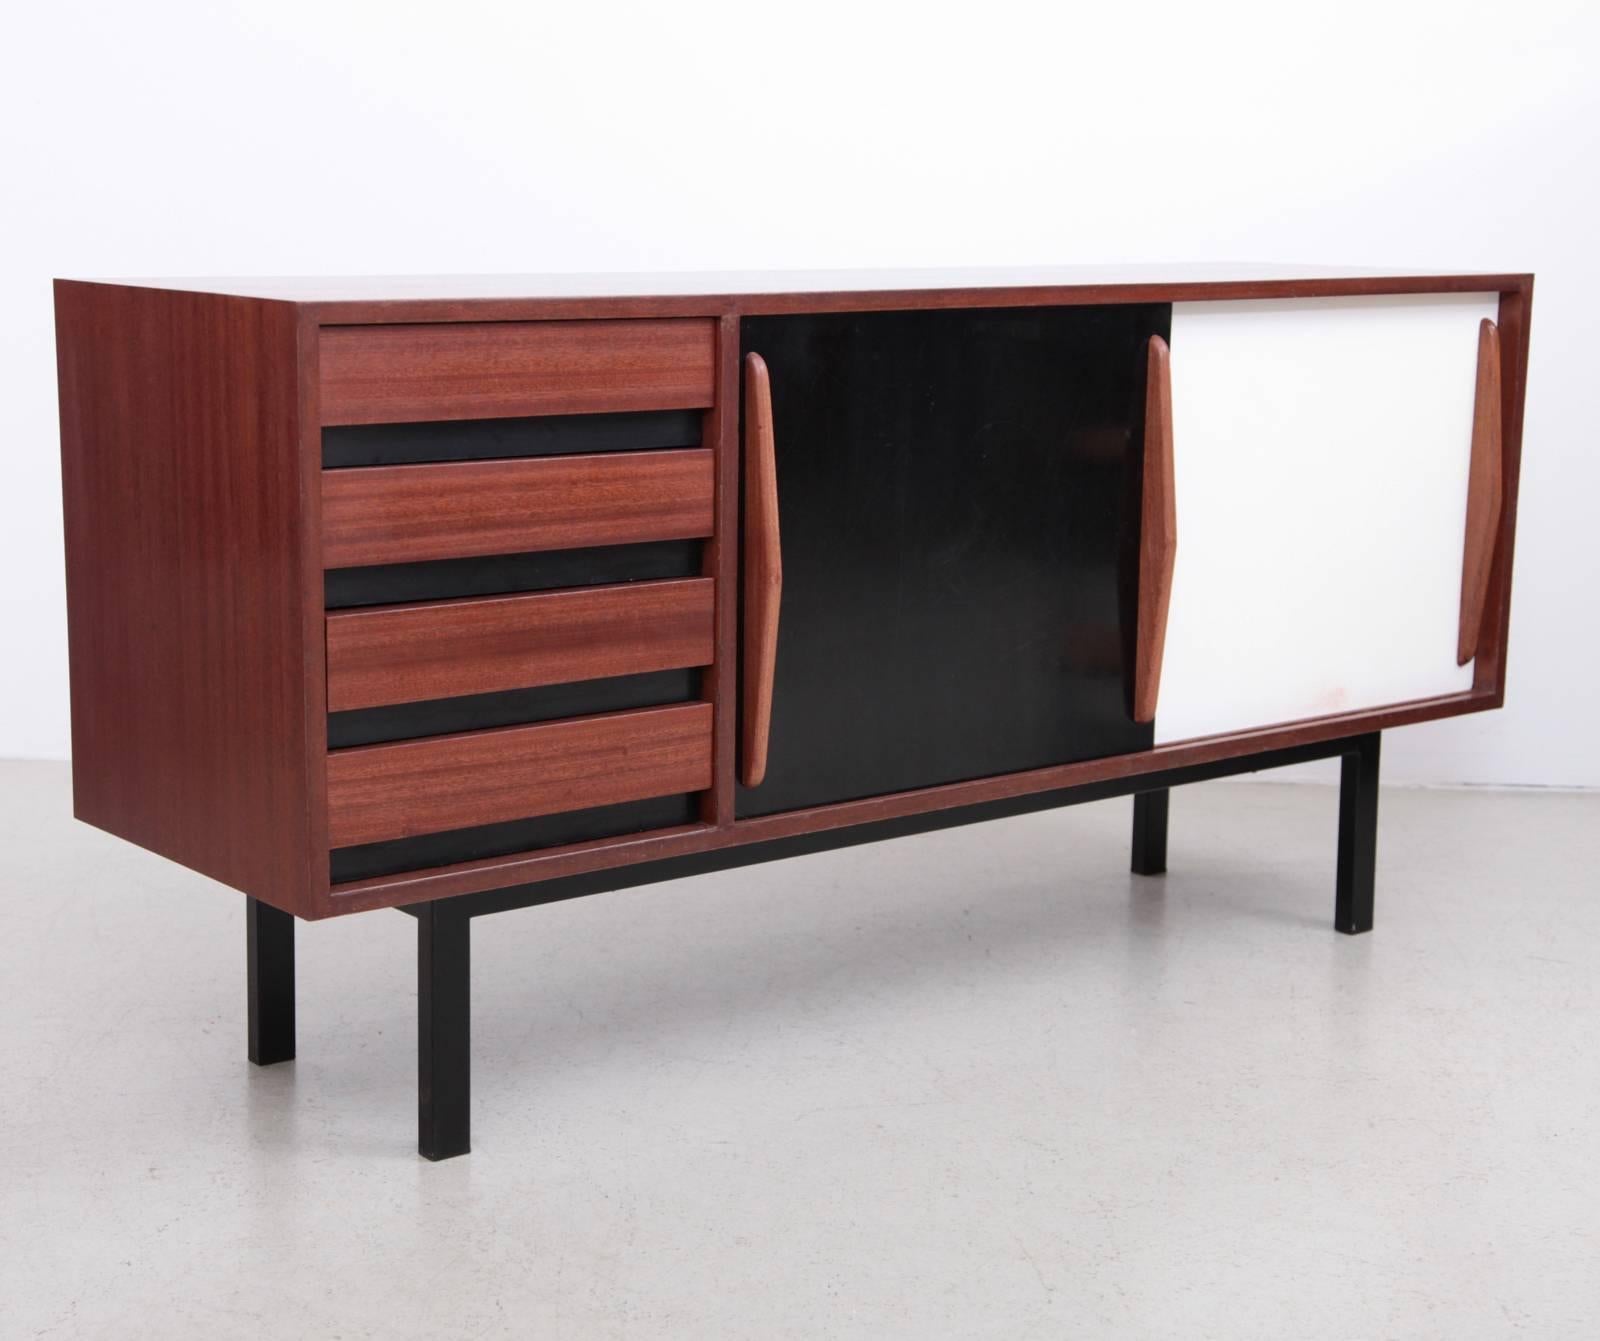 Fully restored Charlotte Perriand Cansado sideboard in mahogany. Produced in France circa 1958 by Steph Simon. From Guinea, Islamic Republic of Mauritania, Mali, Africa.